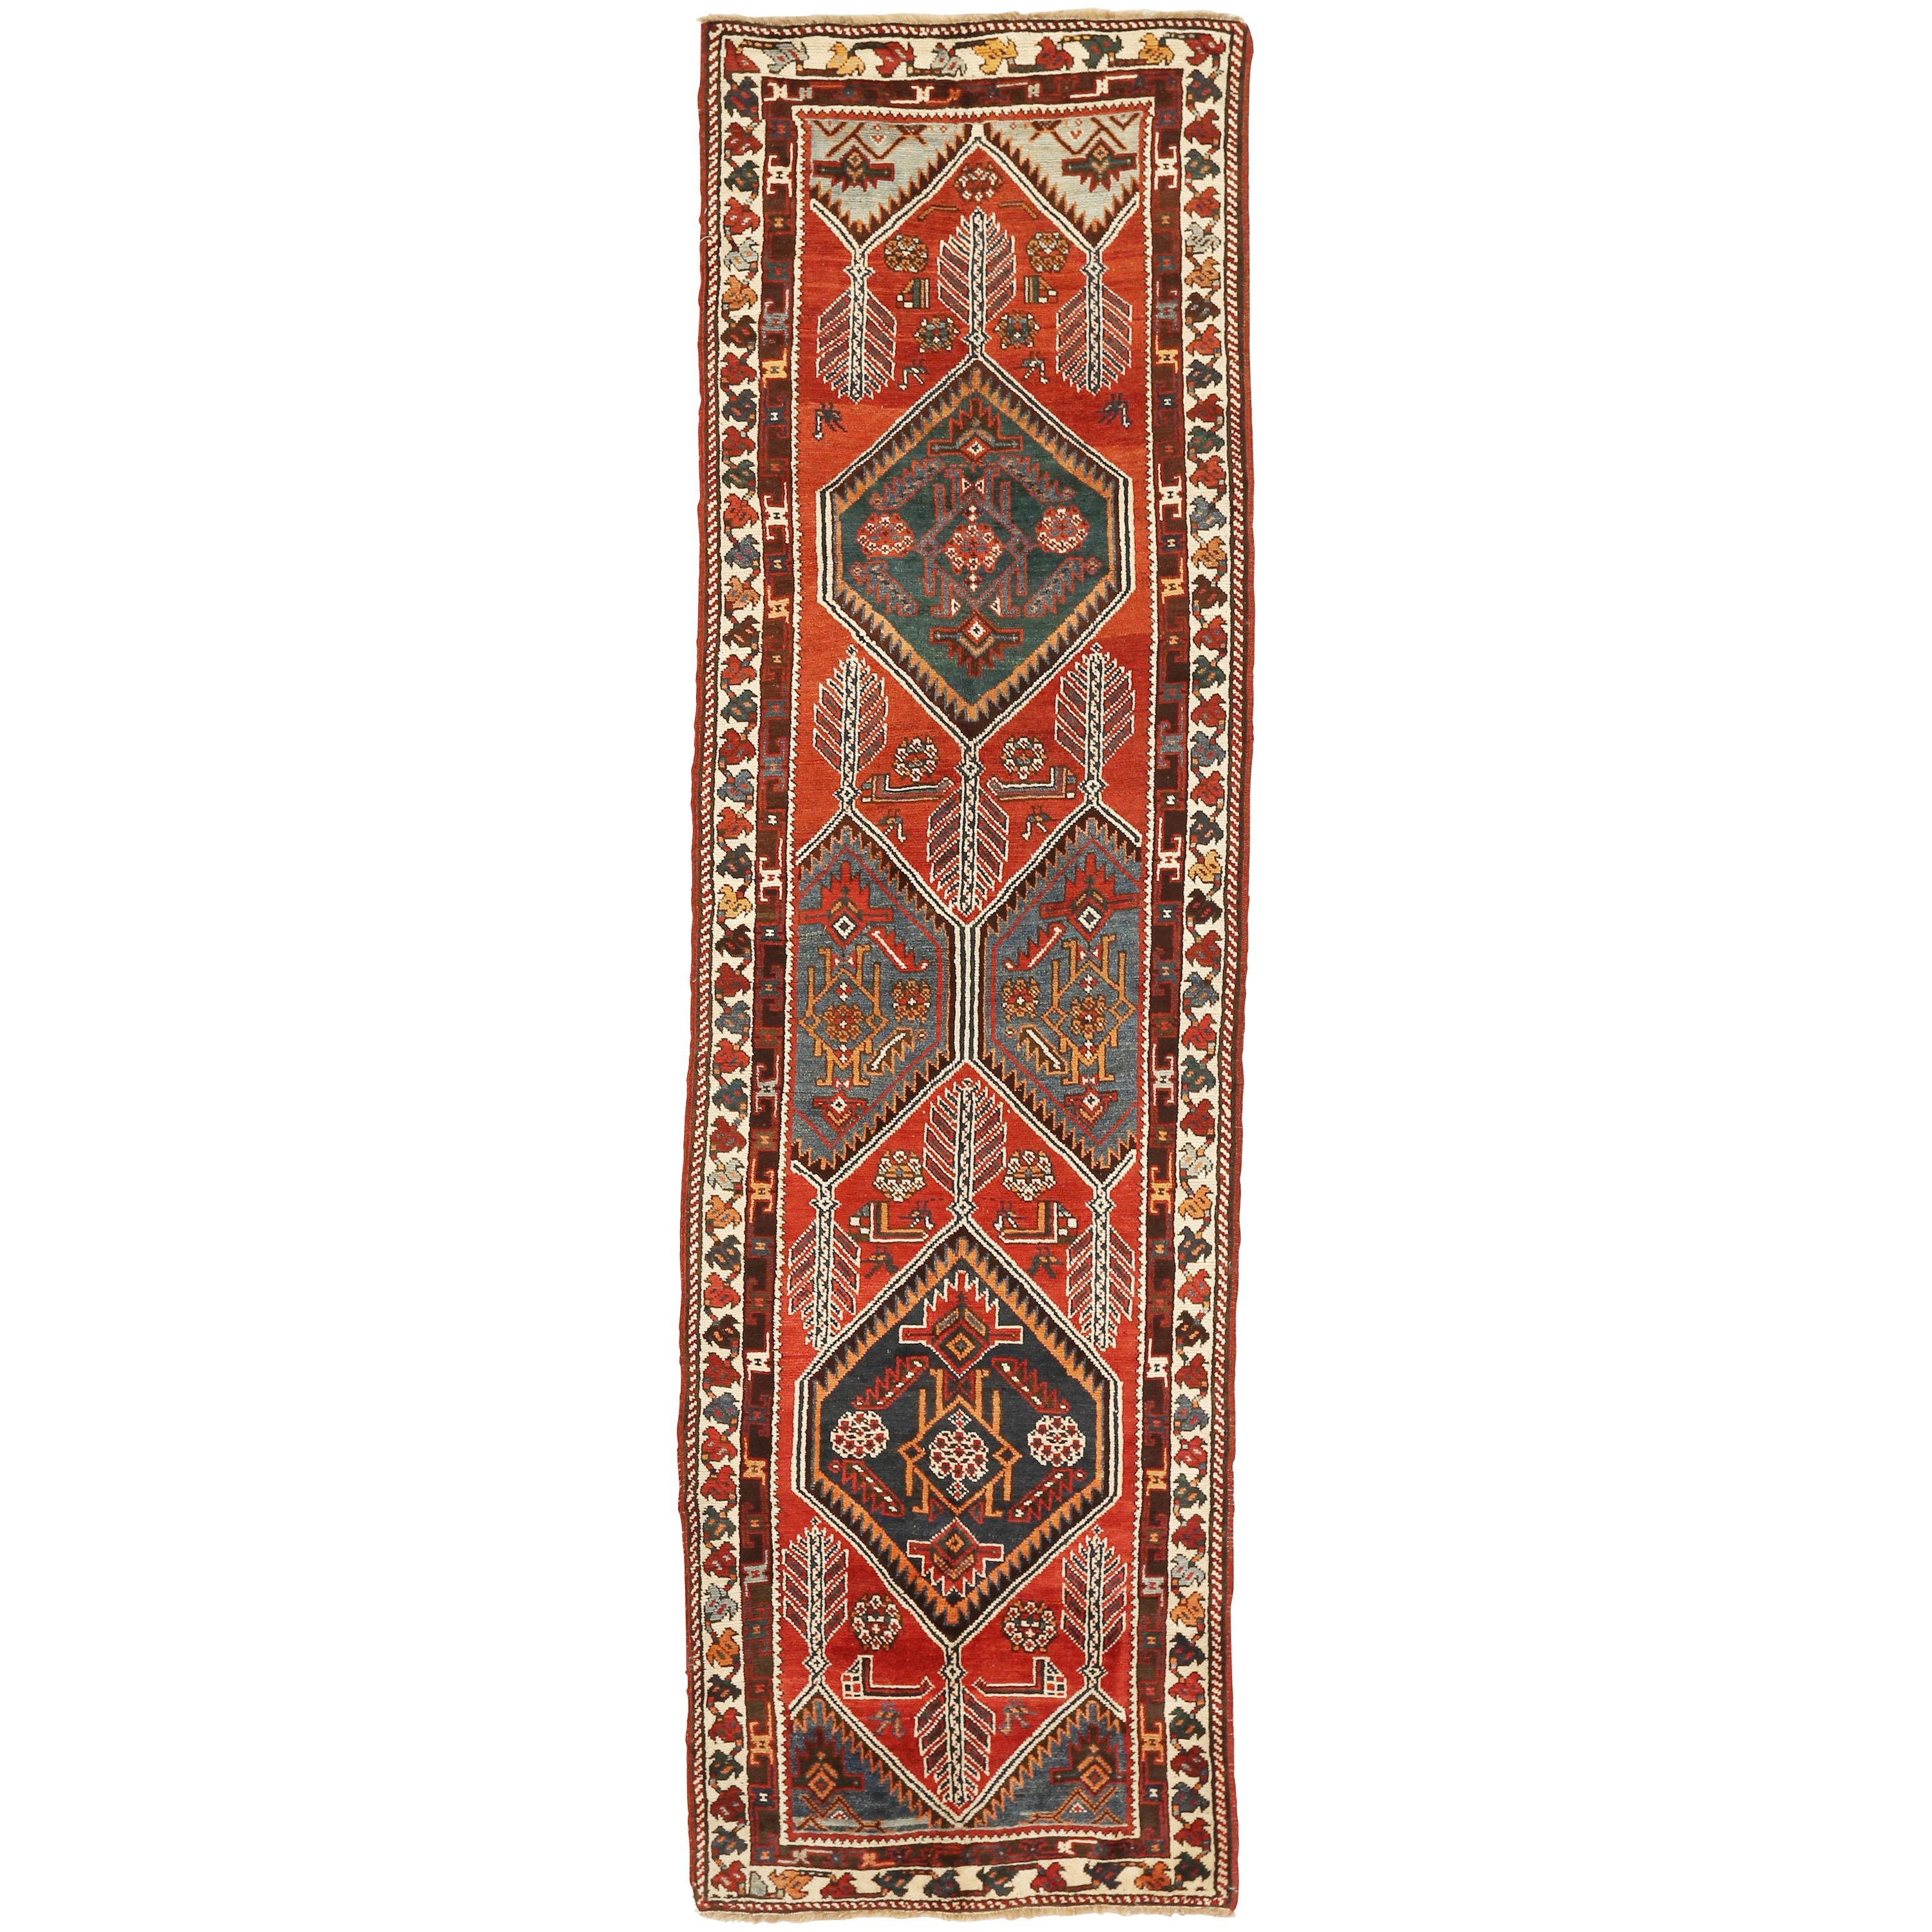 Antique Azerbaijan Runner Rug with Red and Black Tribal Details